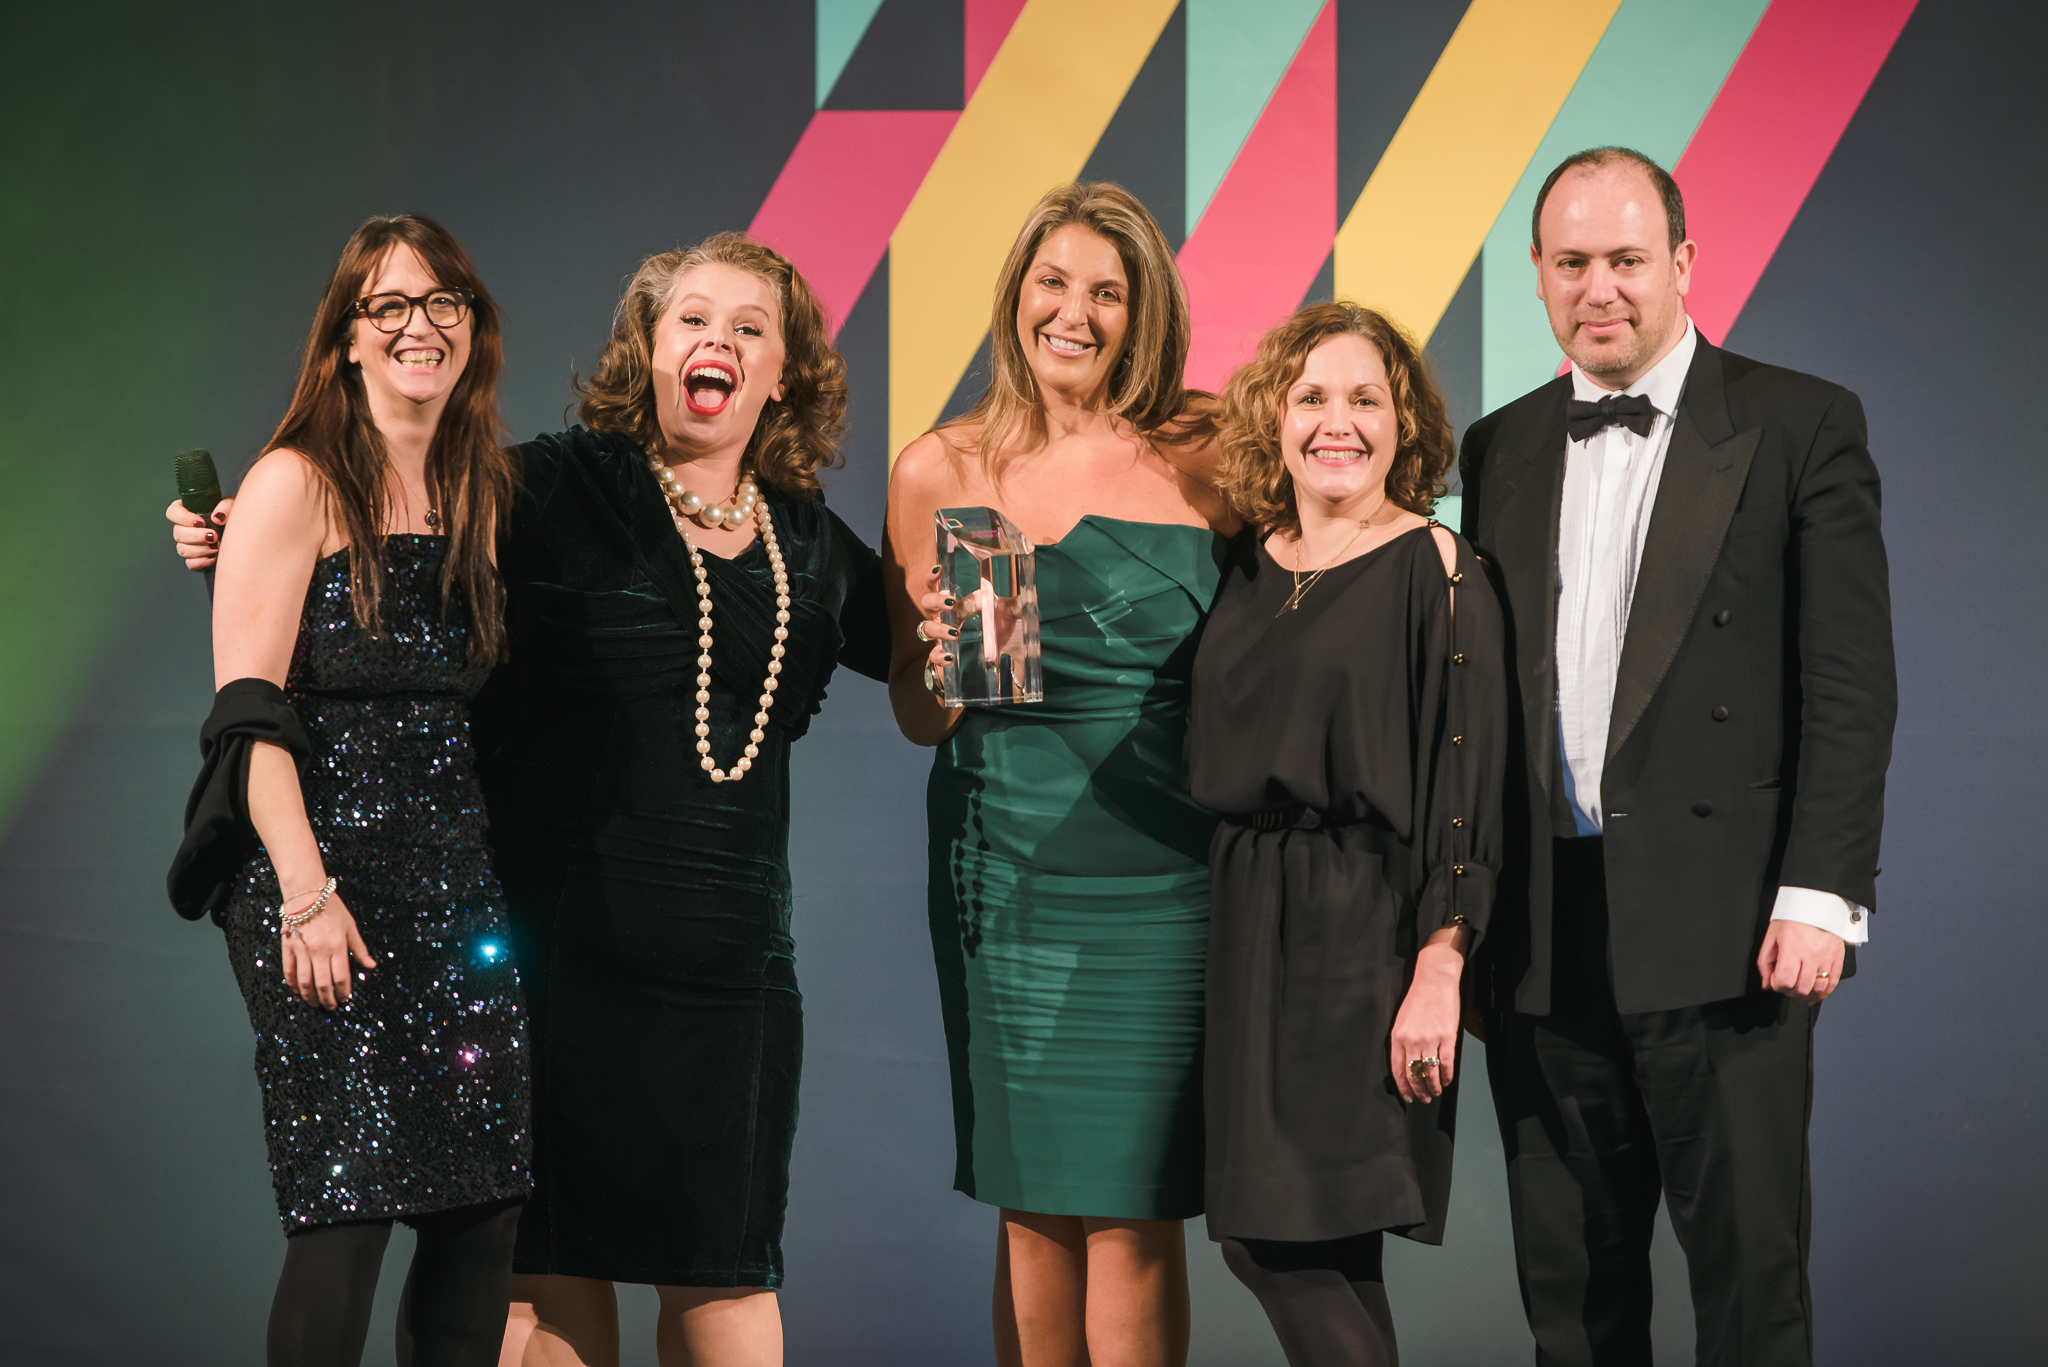 Brave Brand of the Year winners, Cancer Research UK